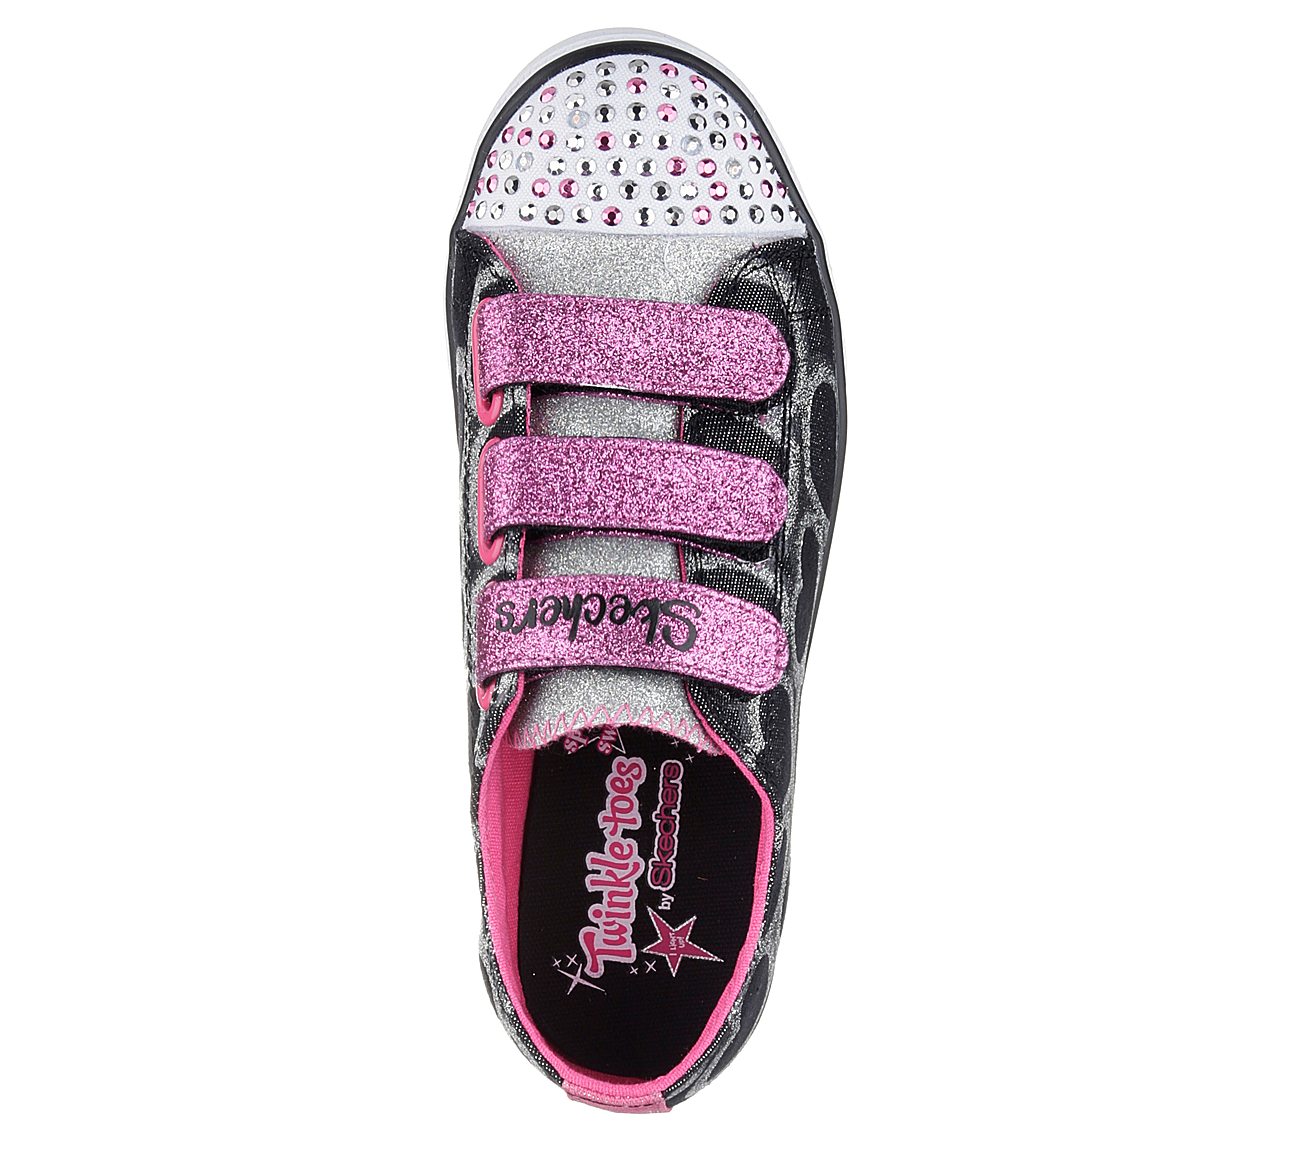 skechers twinkle toes replace battery